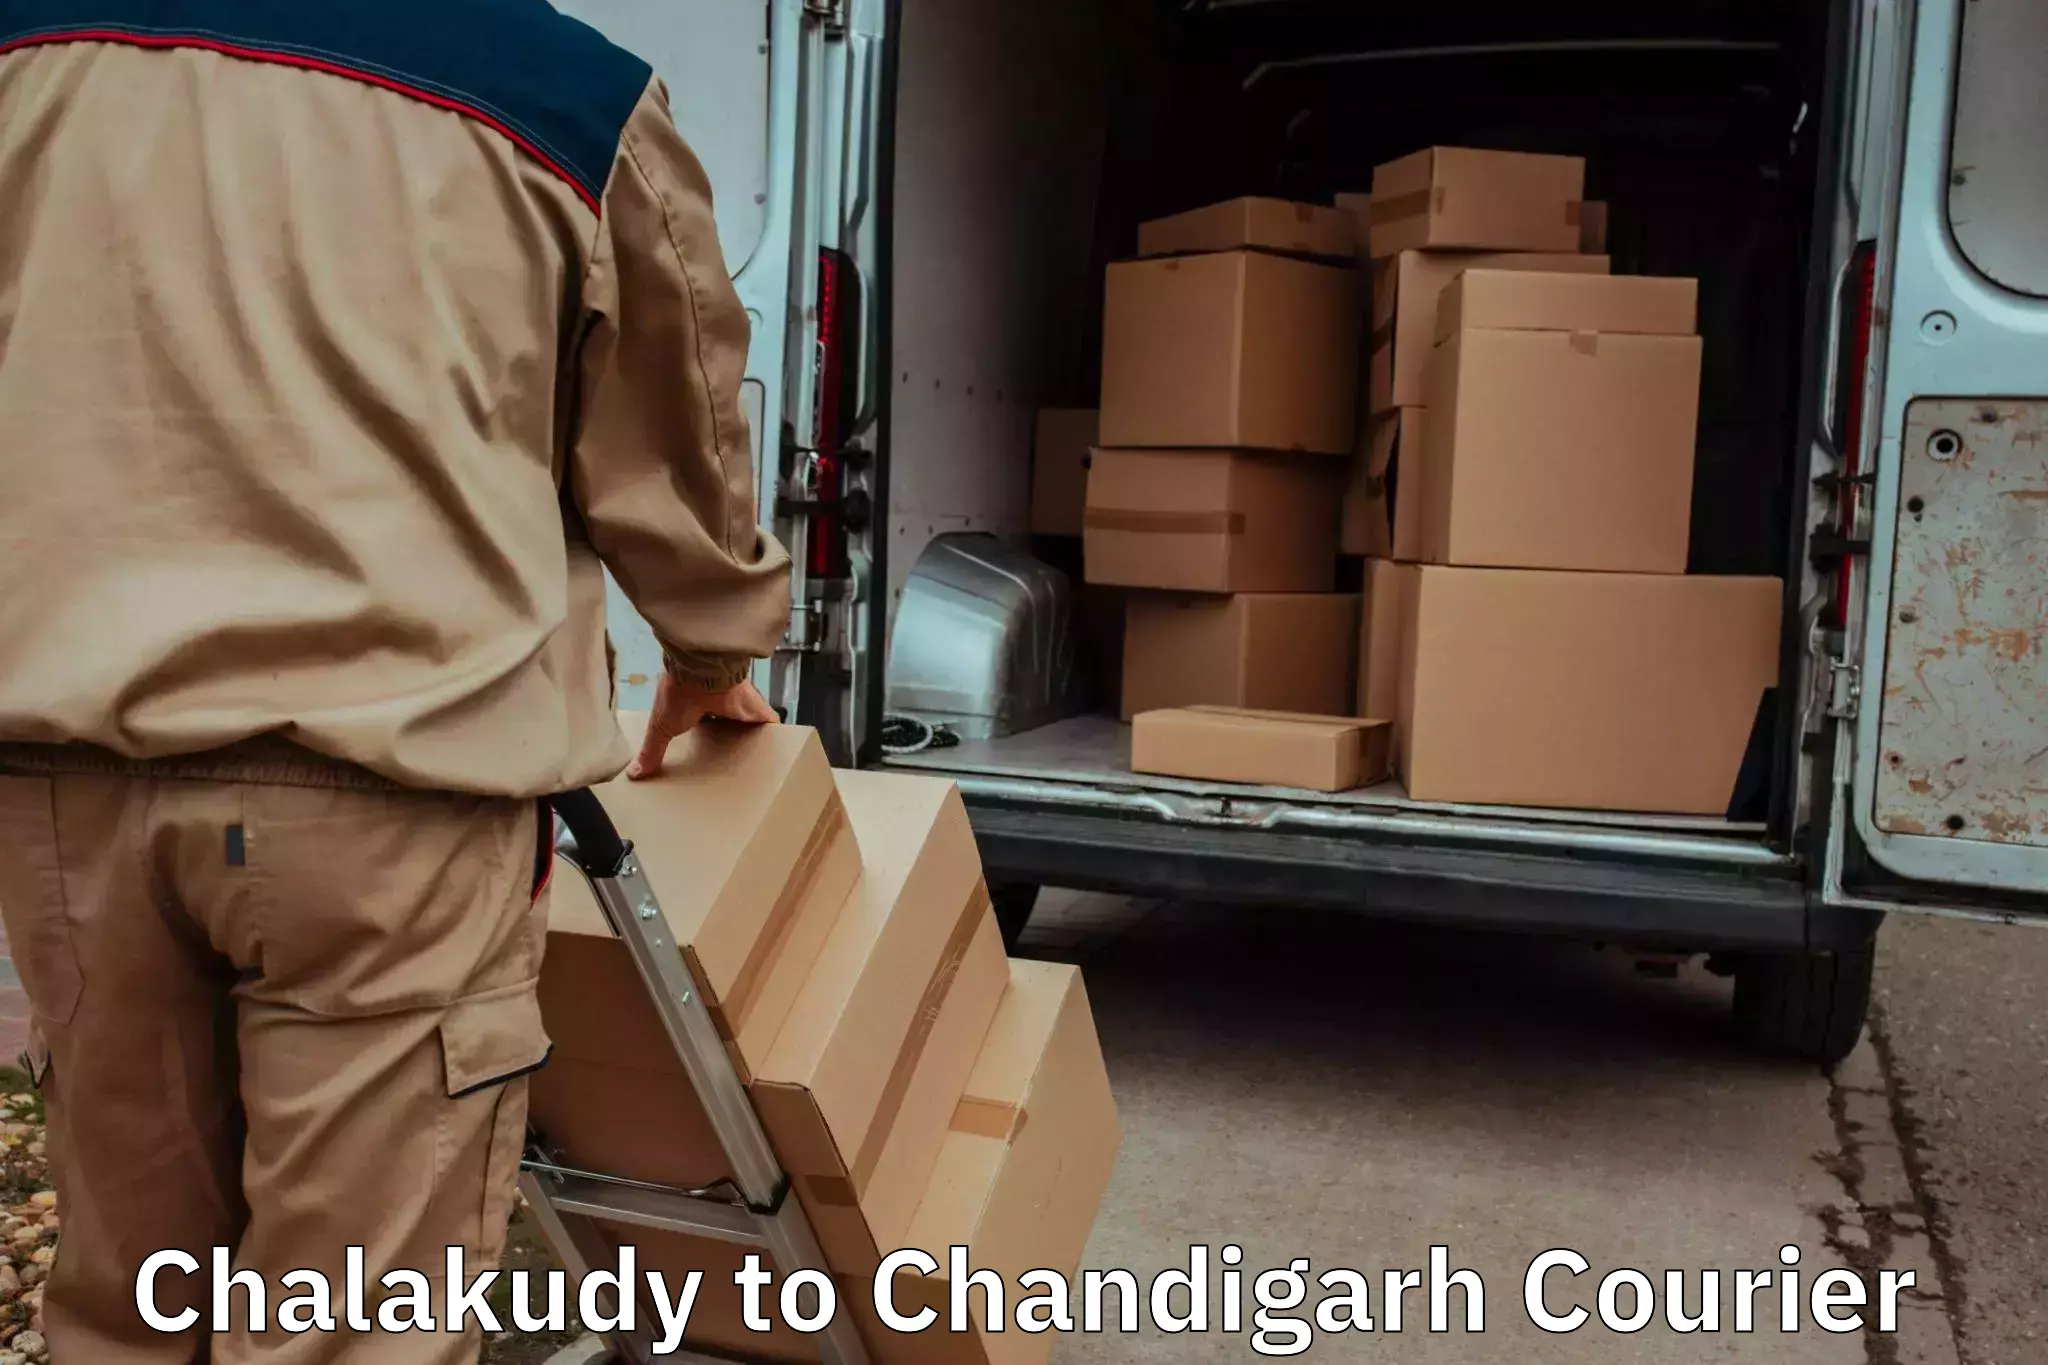 Household goods transport service Chalakudy to Chandigarh